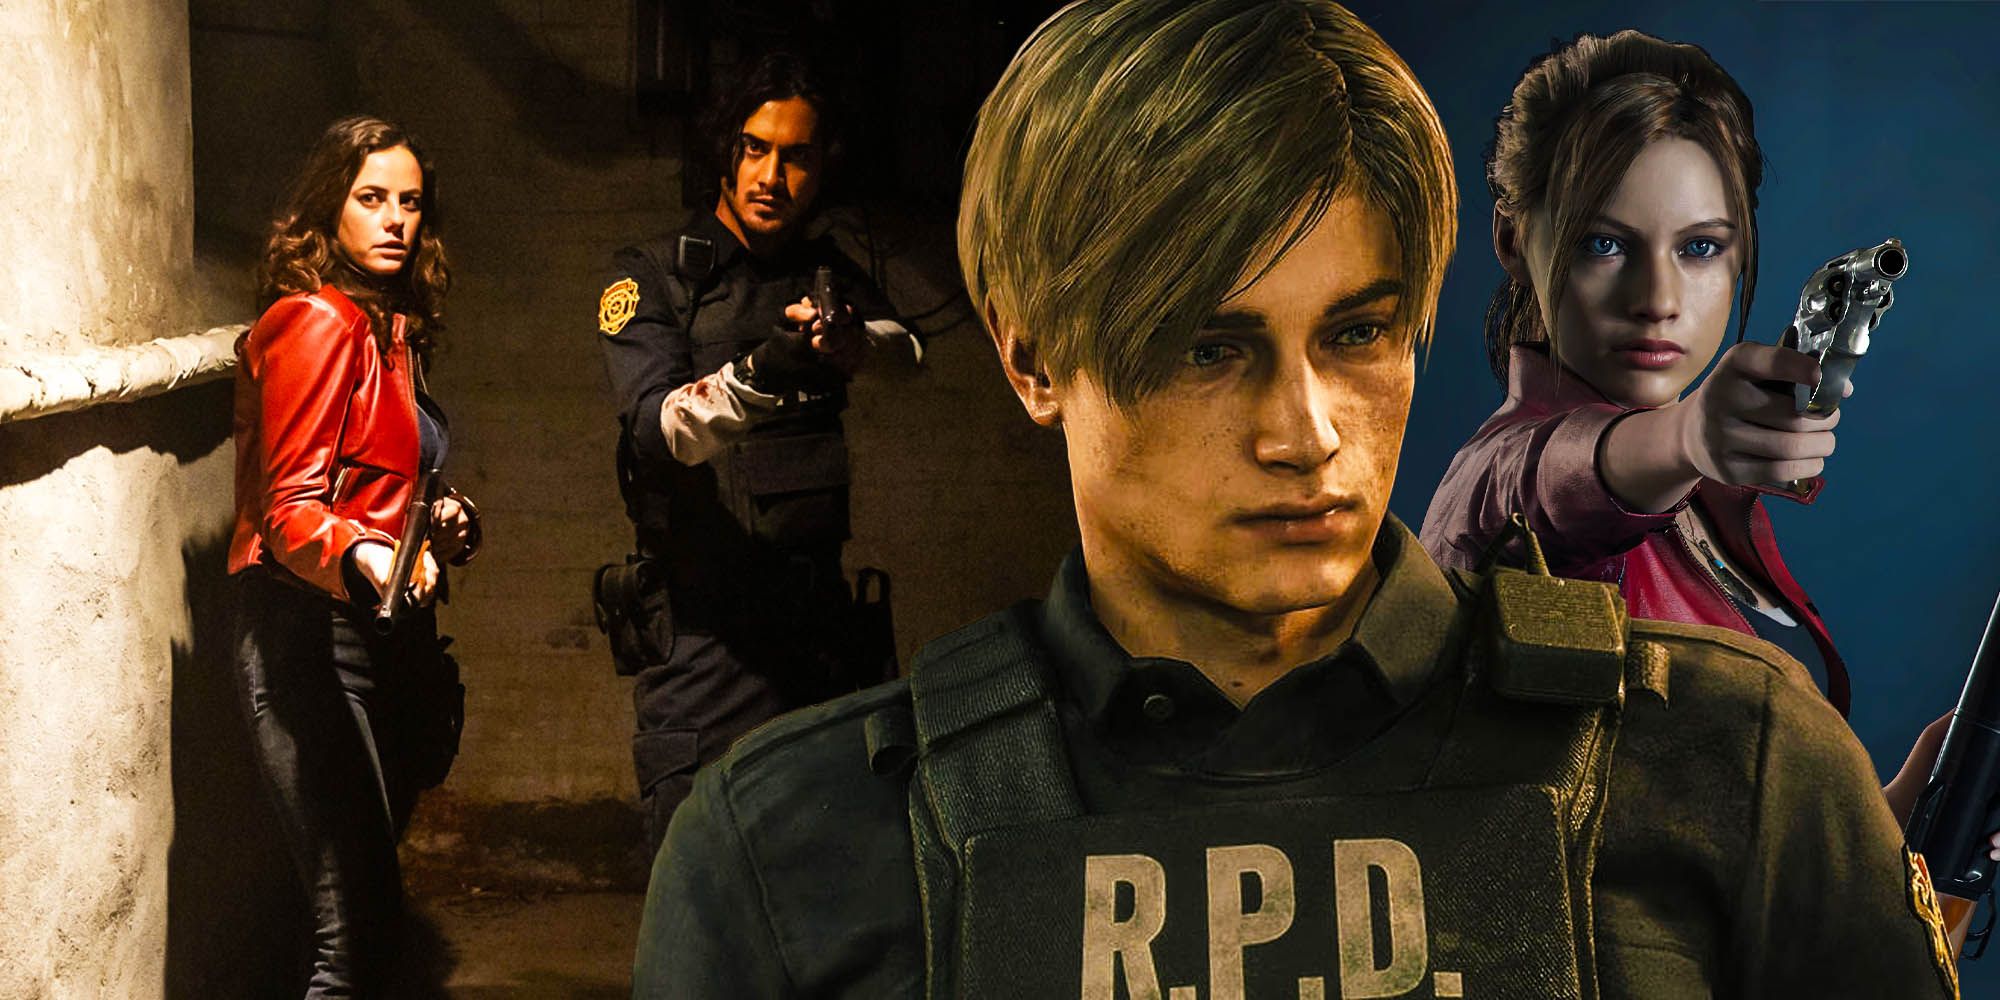 Resident Evil Reboot: Is This Marvel Actress The New Jill Valentine?